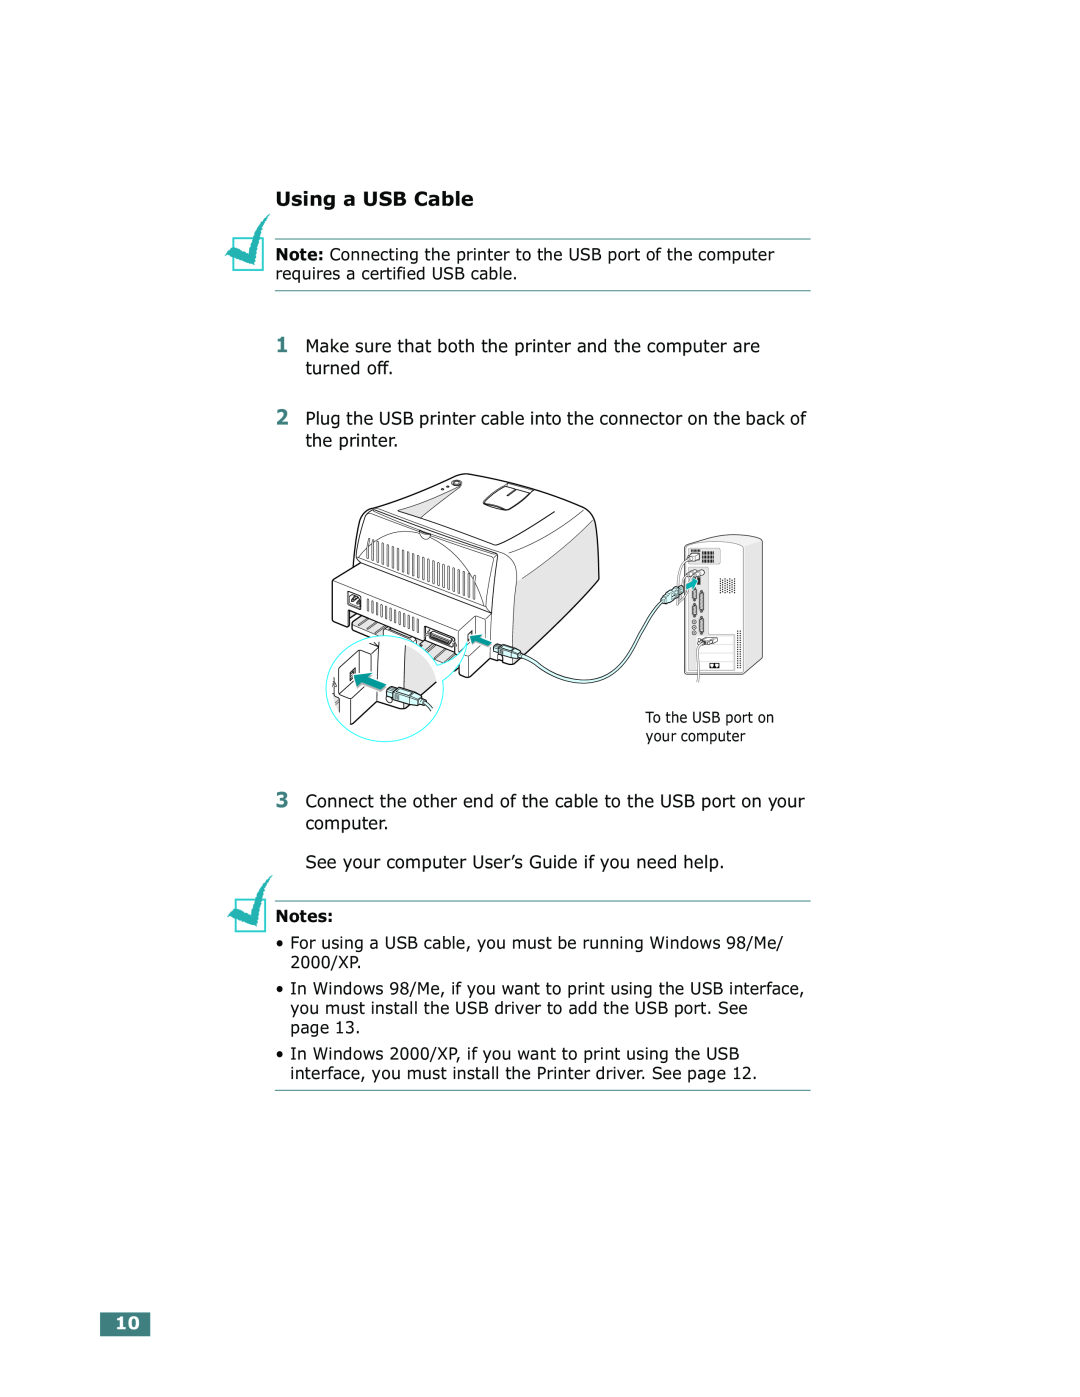 Xerox Phaser 3130 manual Using a USB Cable, To the USB port on your computer 